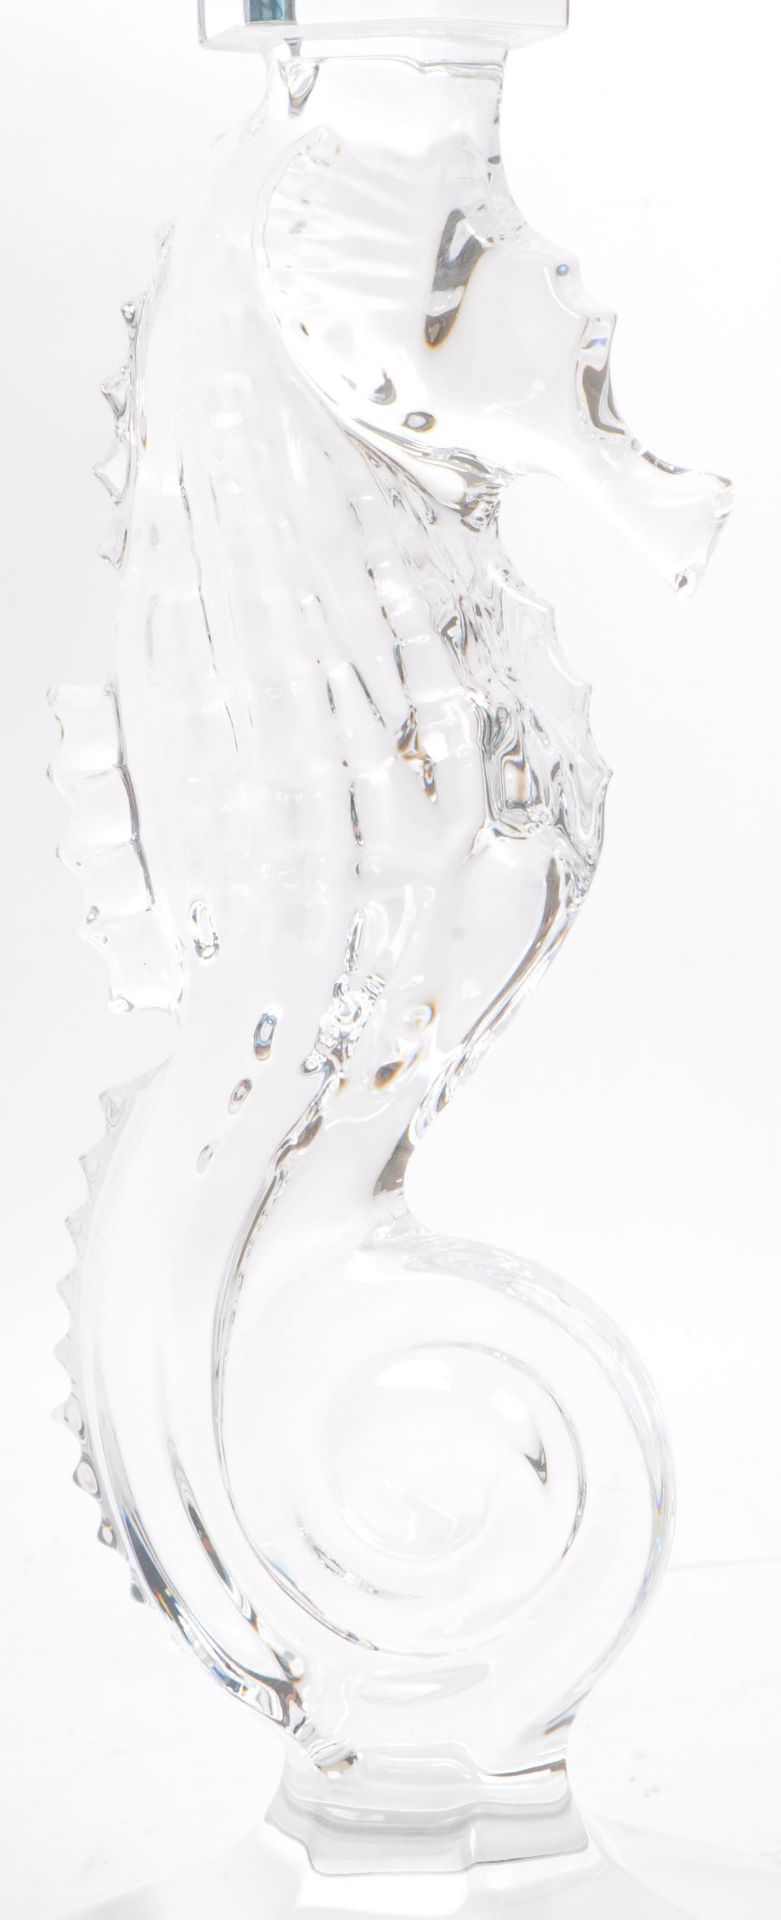 WATERFORD CRYSTAL GLASS - SEAHORSE TAZZA CENTREPIECE NOS - Image 7 of 7